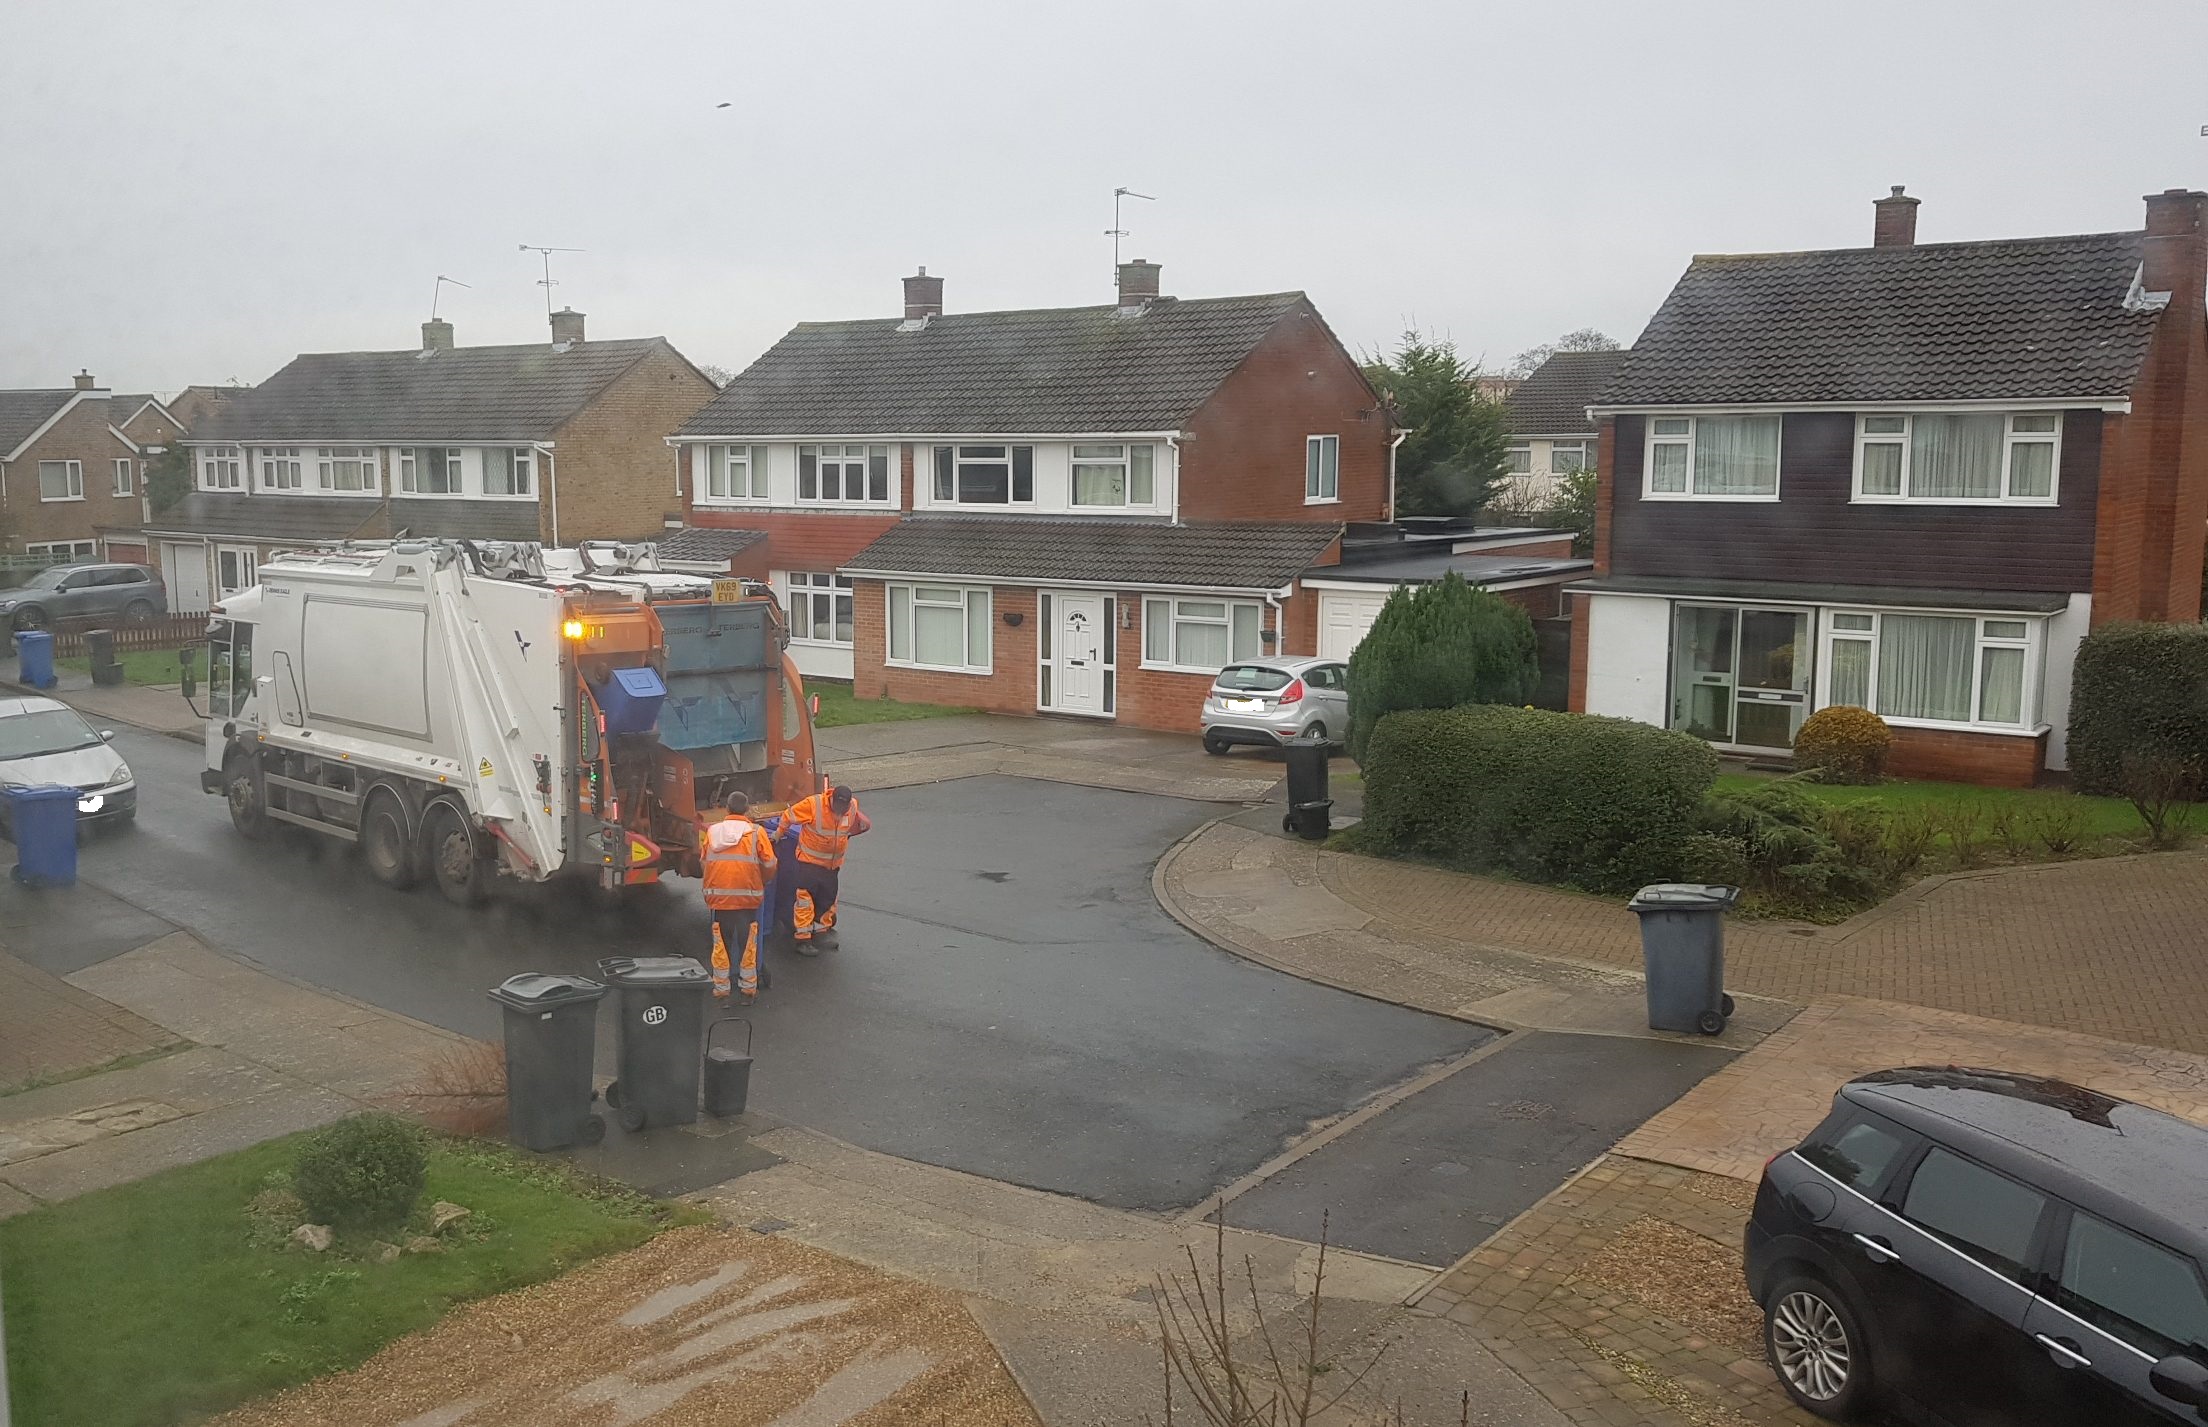 bin lorry collecting waste no plates